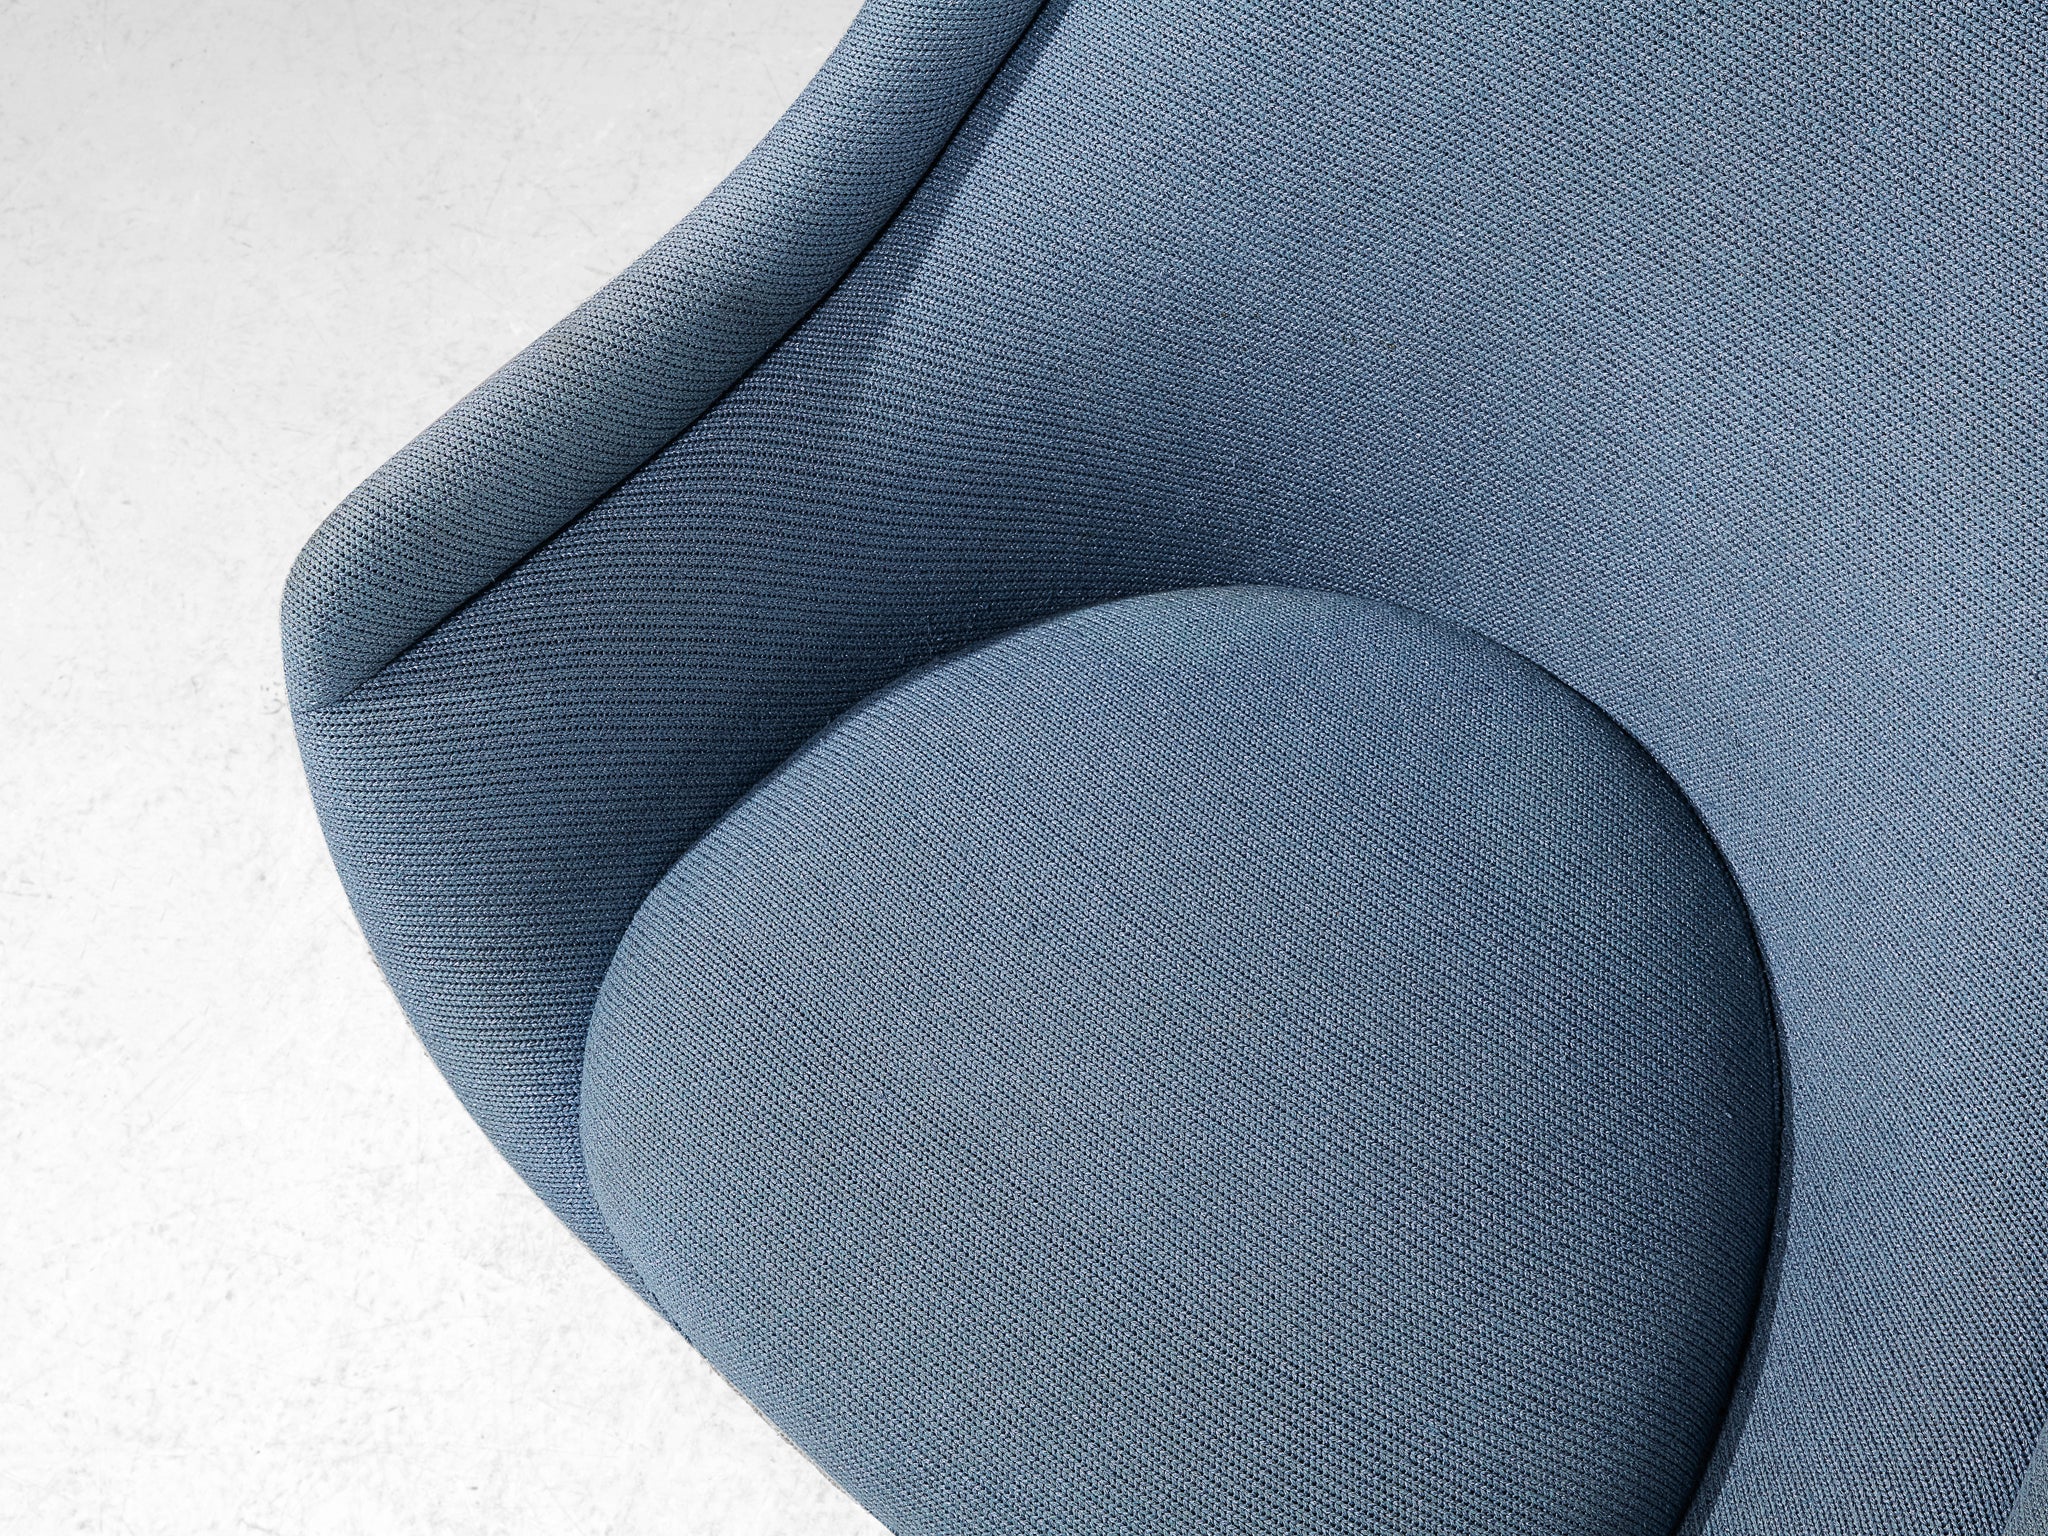 Warren Platner Pair of Easy Chairs in Baby Blue Upholstery